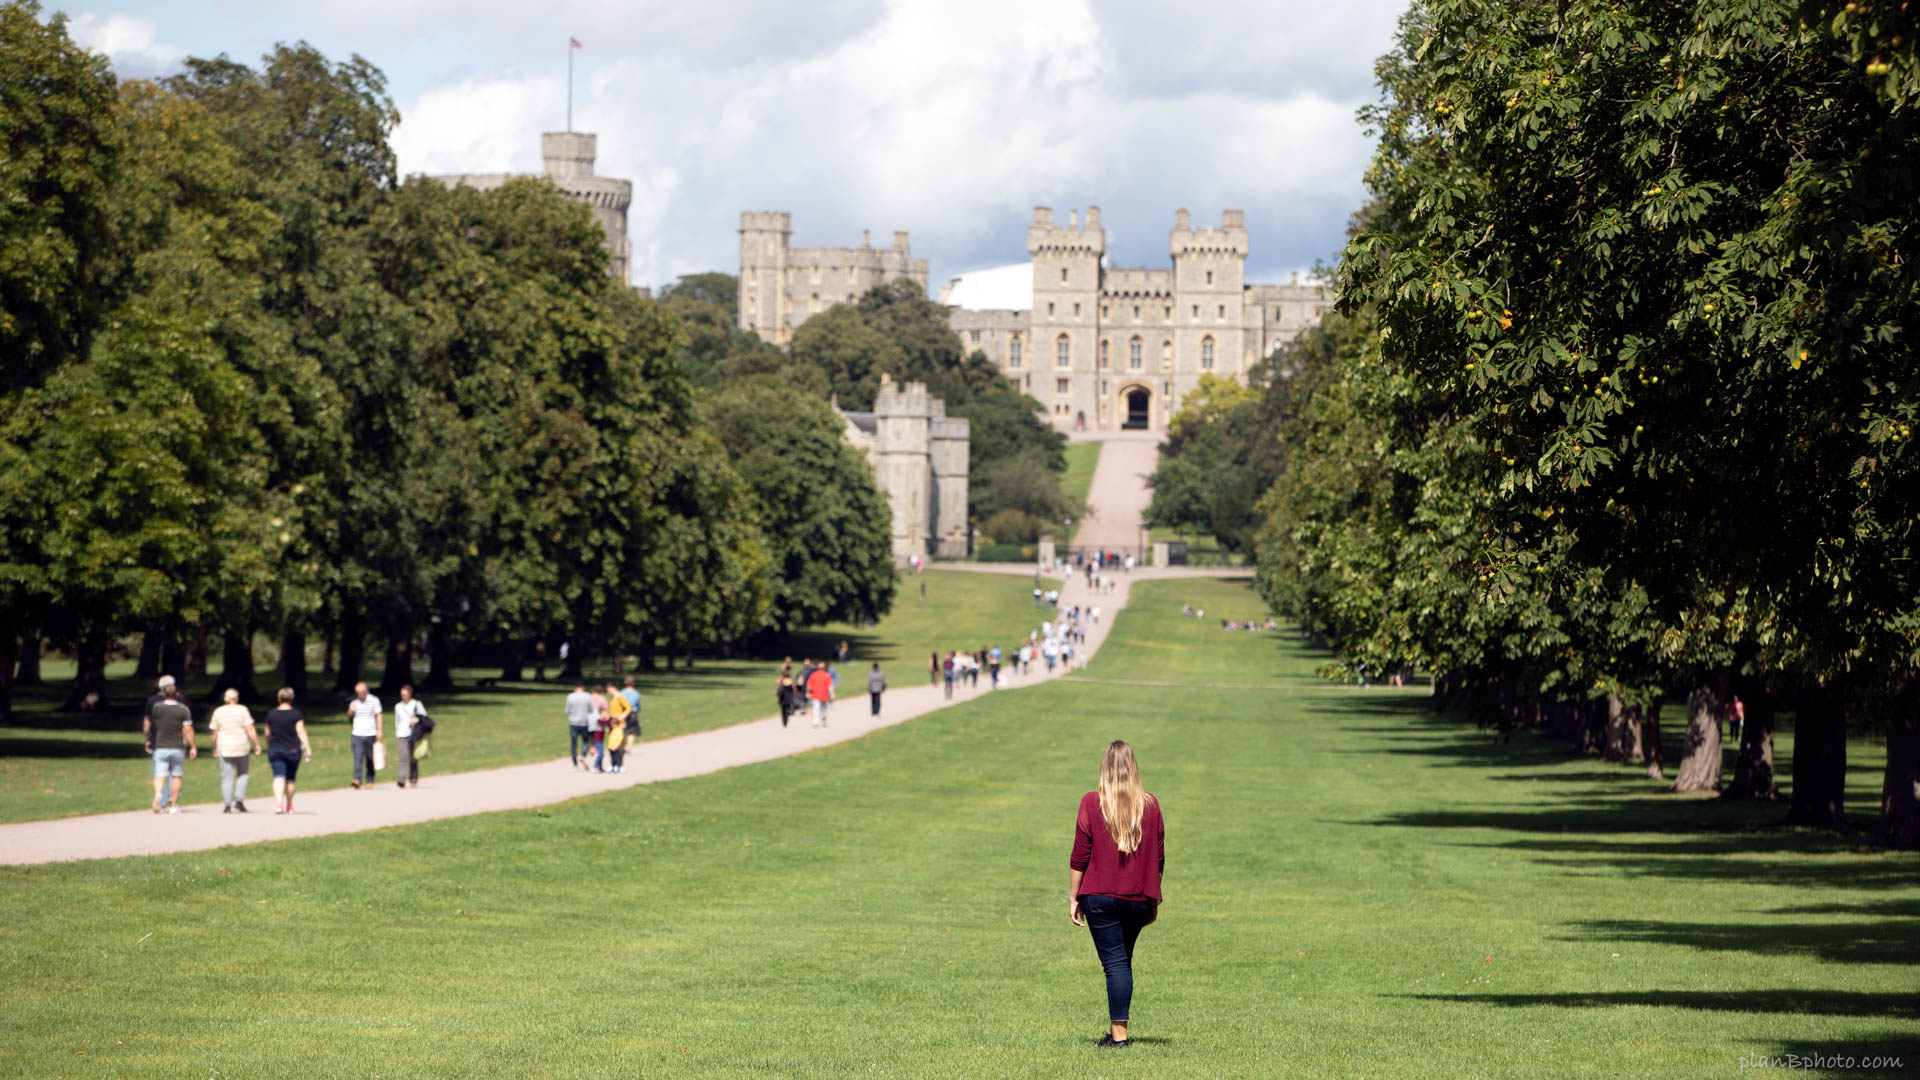 The long walk - best photography location for Windsor castle